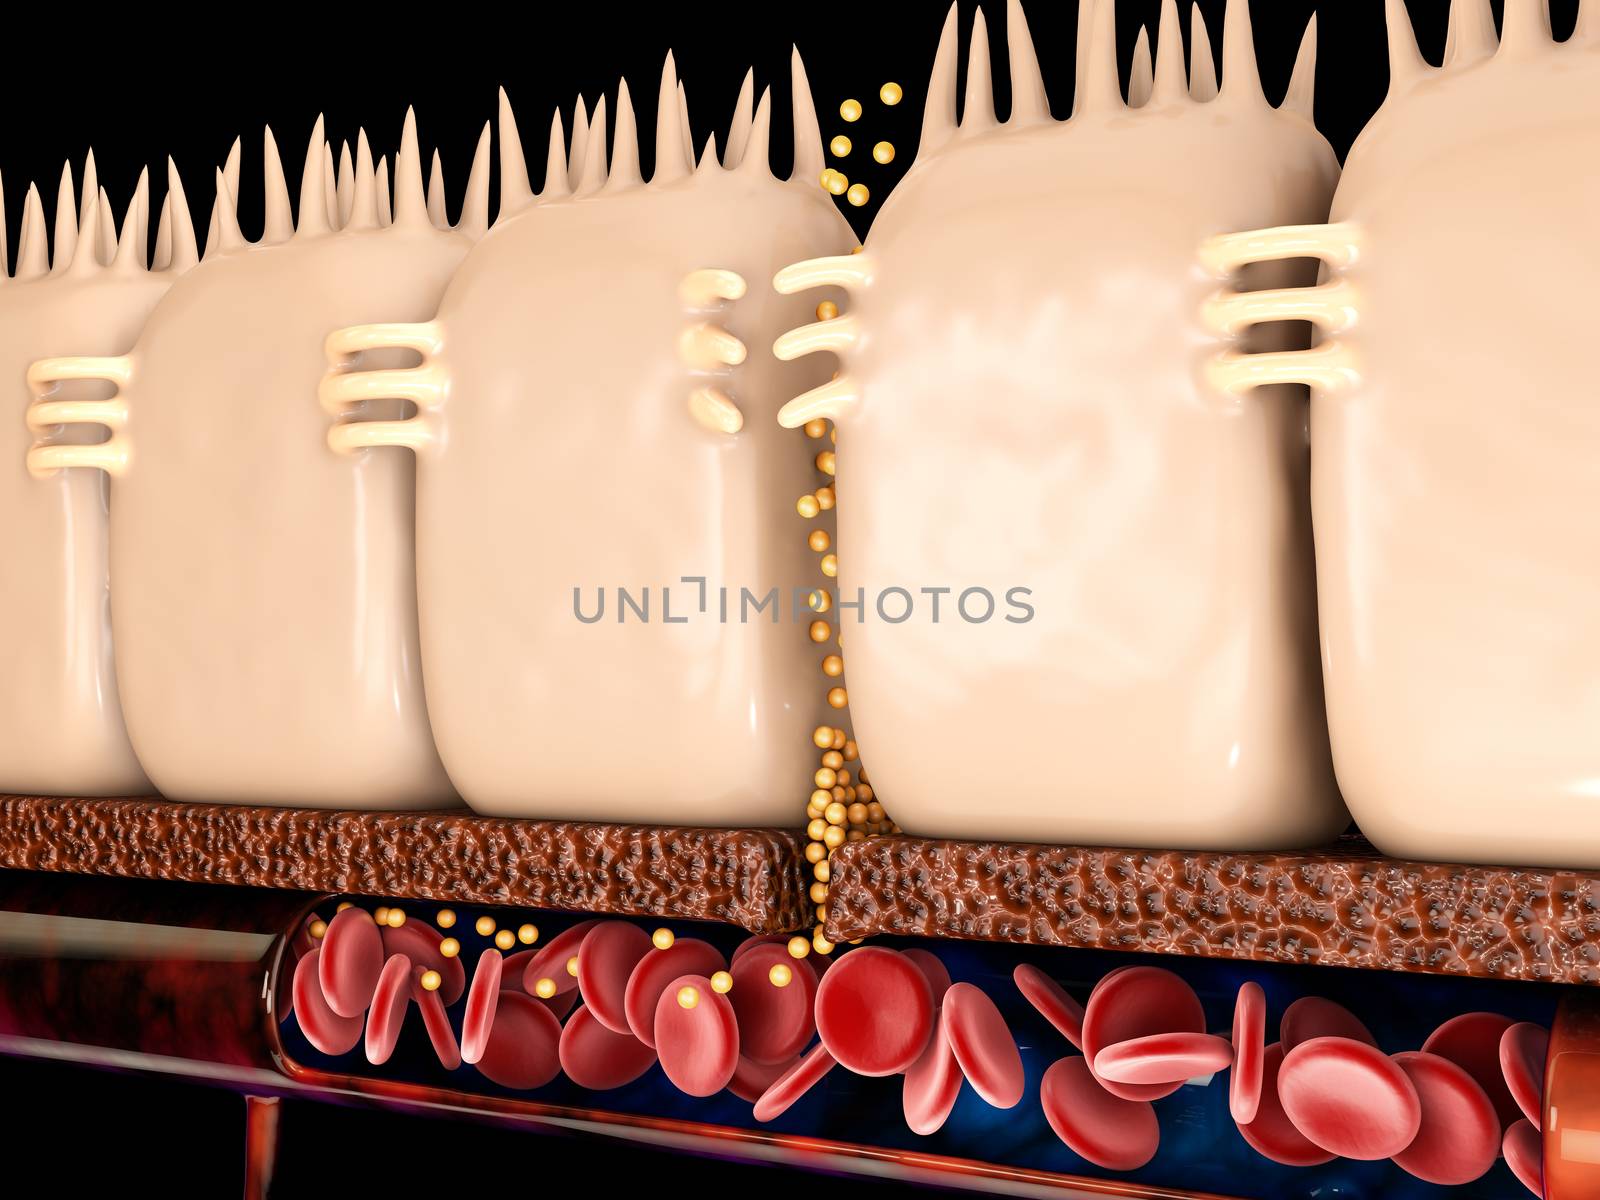 3d Rendering of leaky gut, in intestine with celiac disease and gluten sensitivity these tight junctions come apart